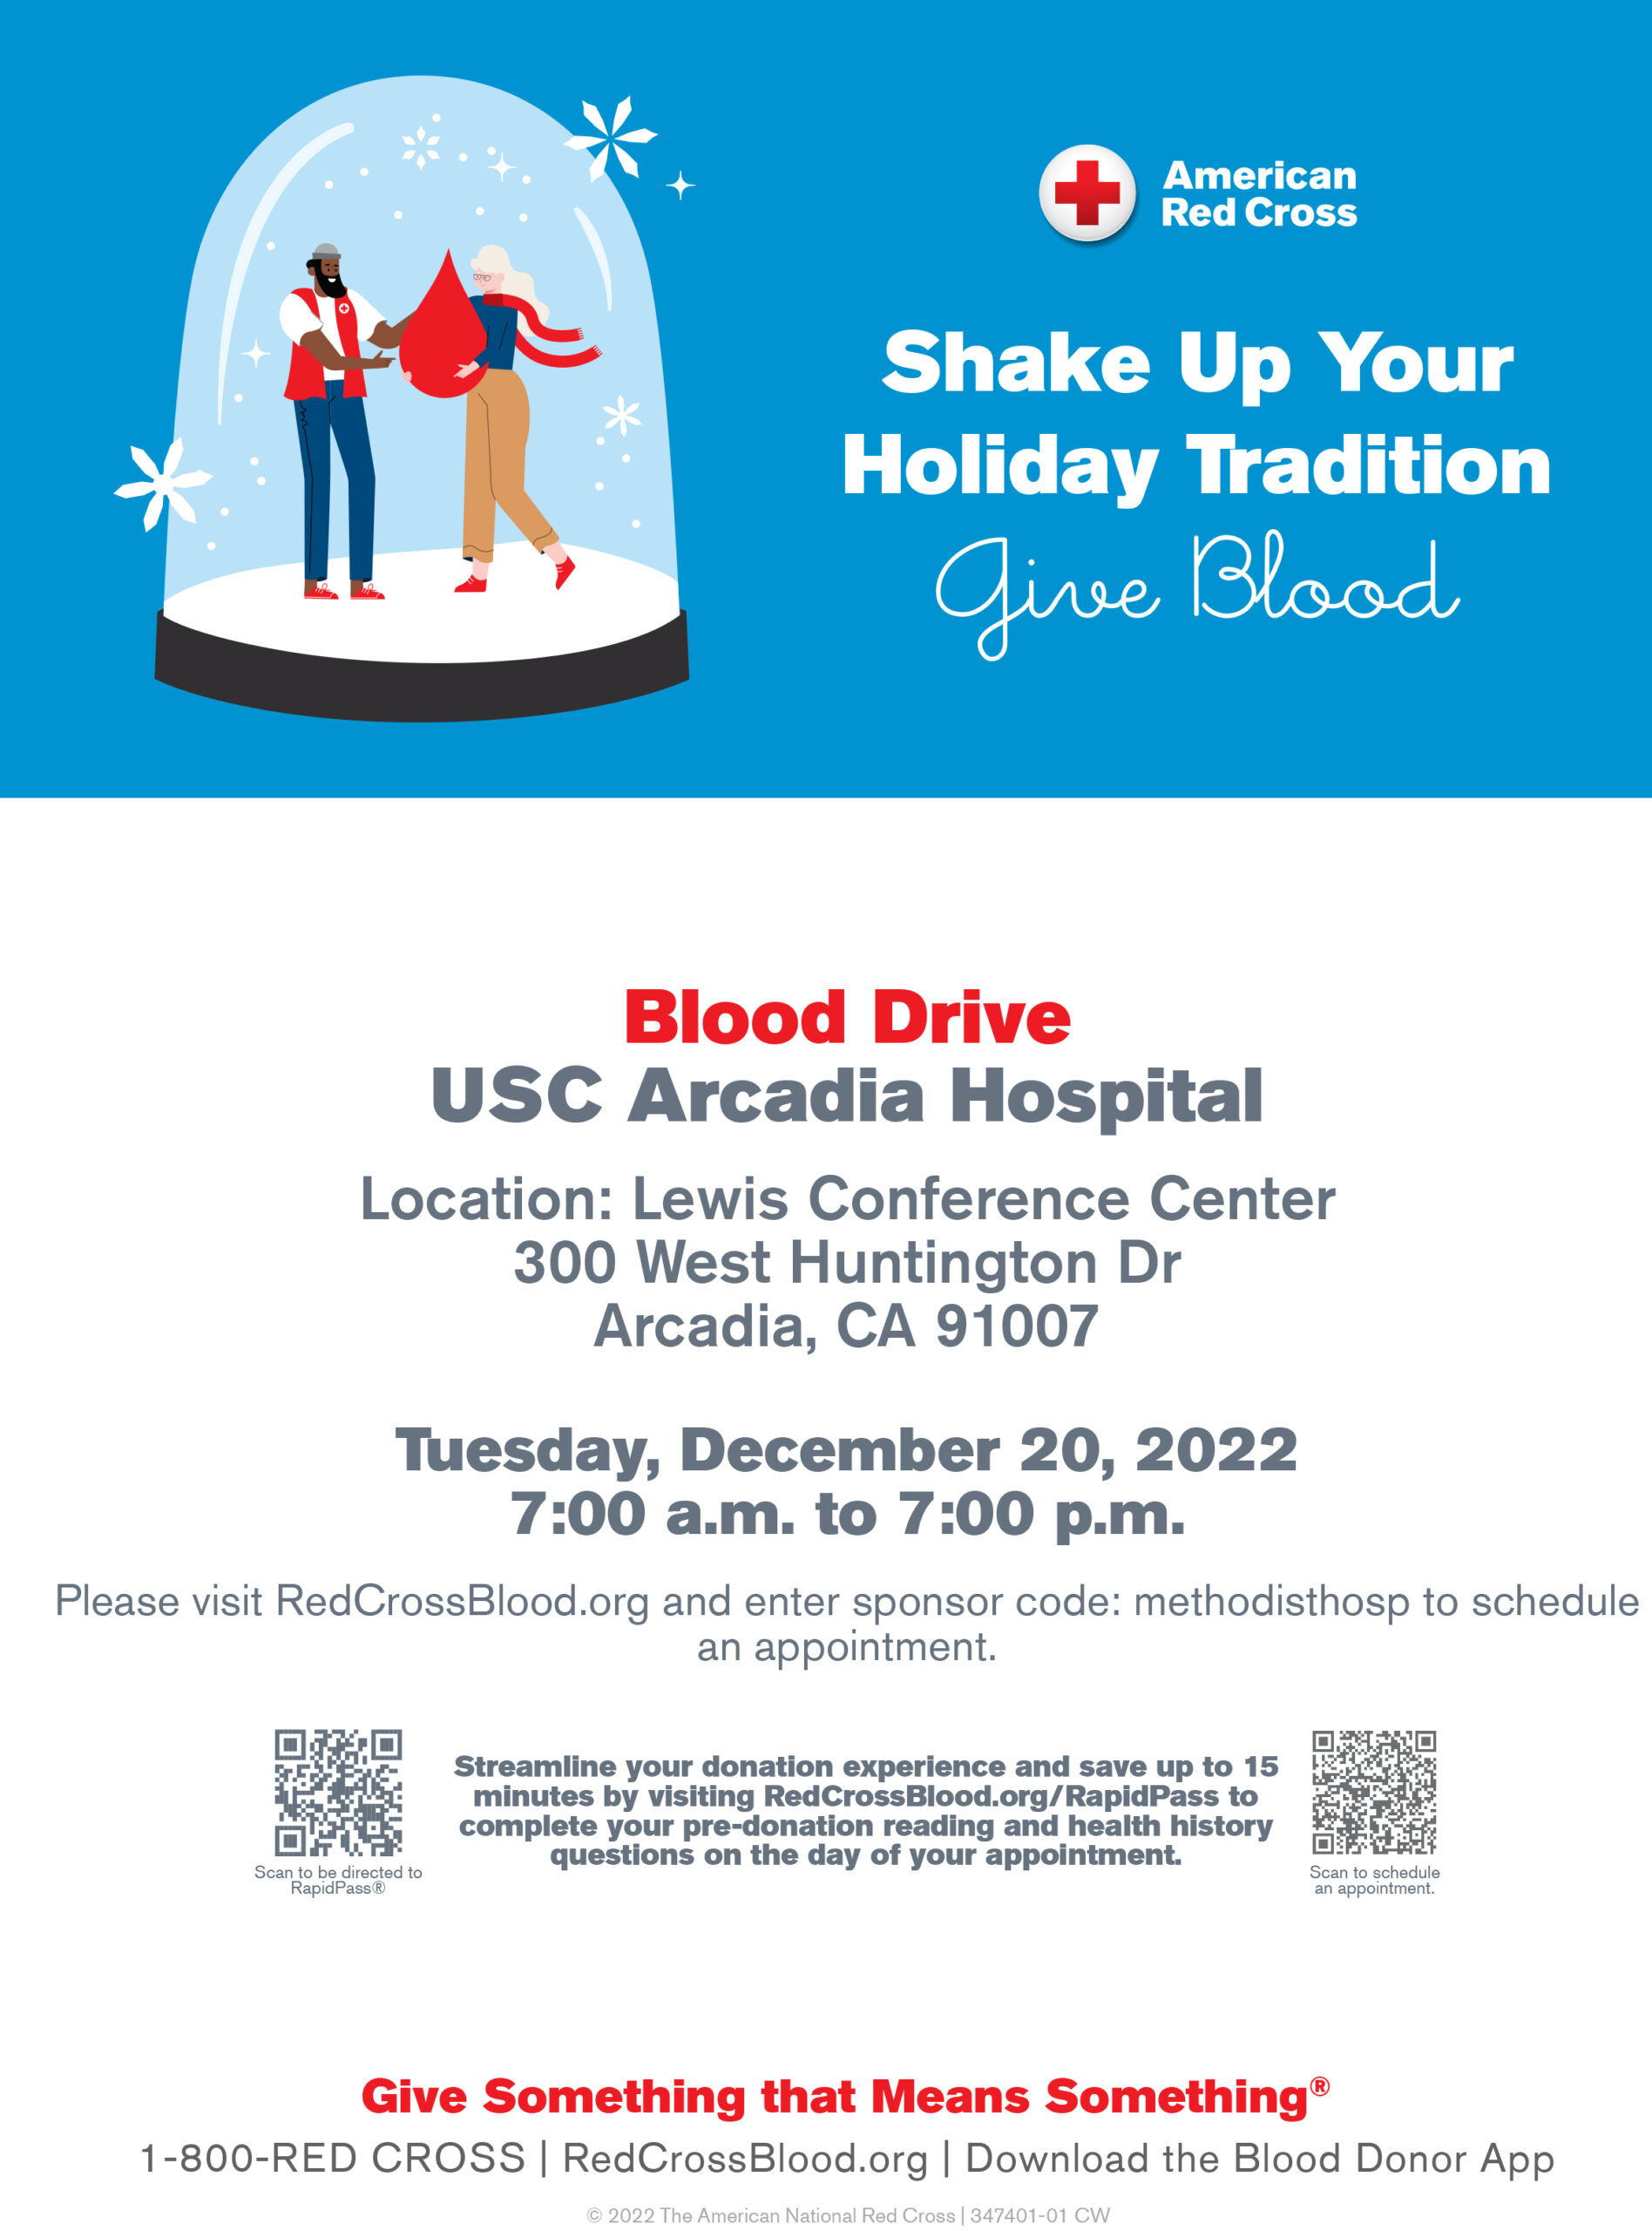 USC Arcadia Hospital blood drive with Red Cross flyer for Dec 20